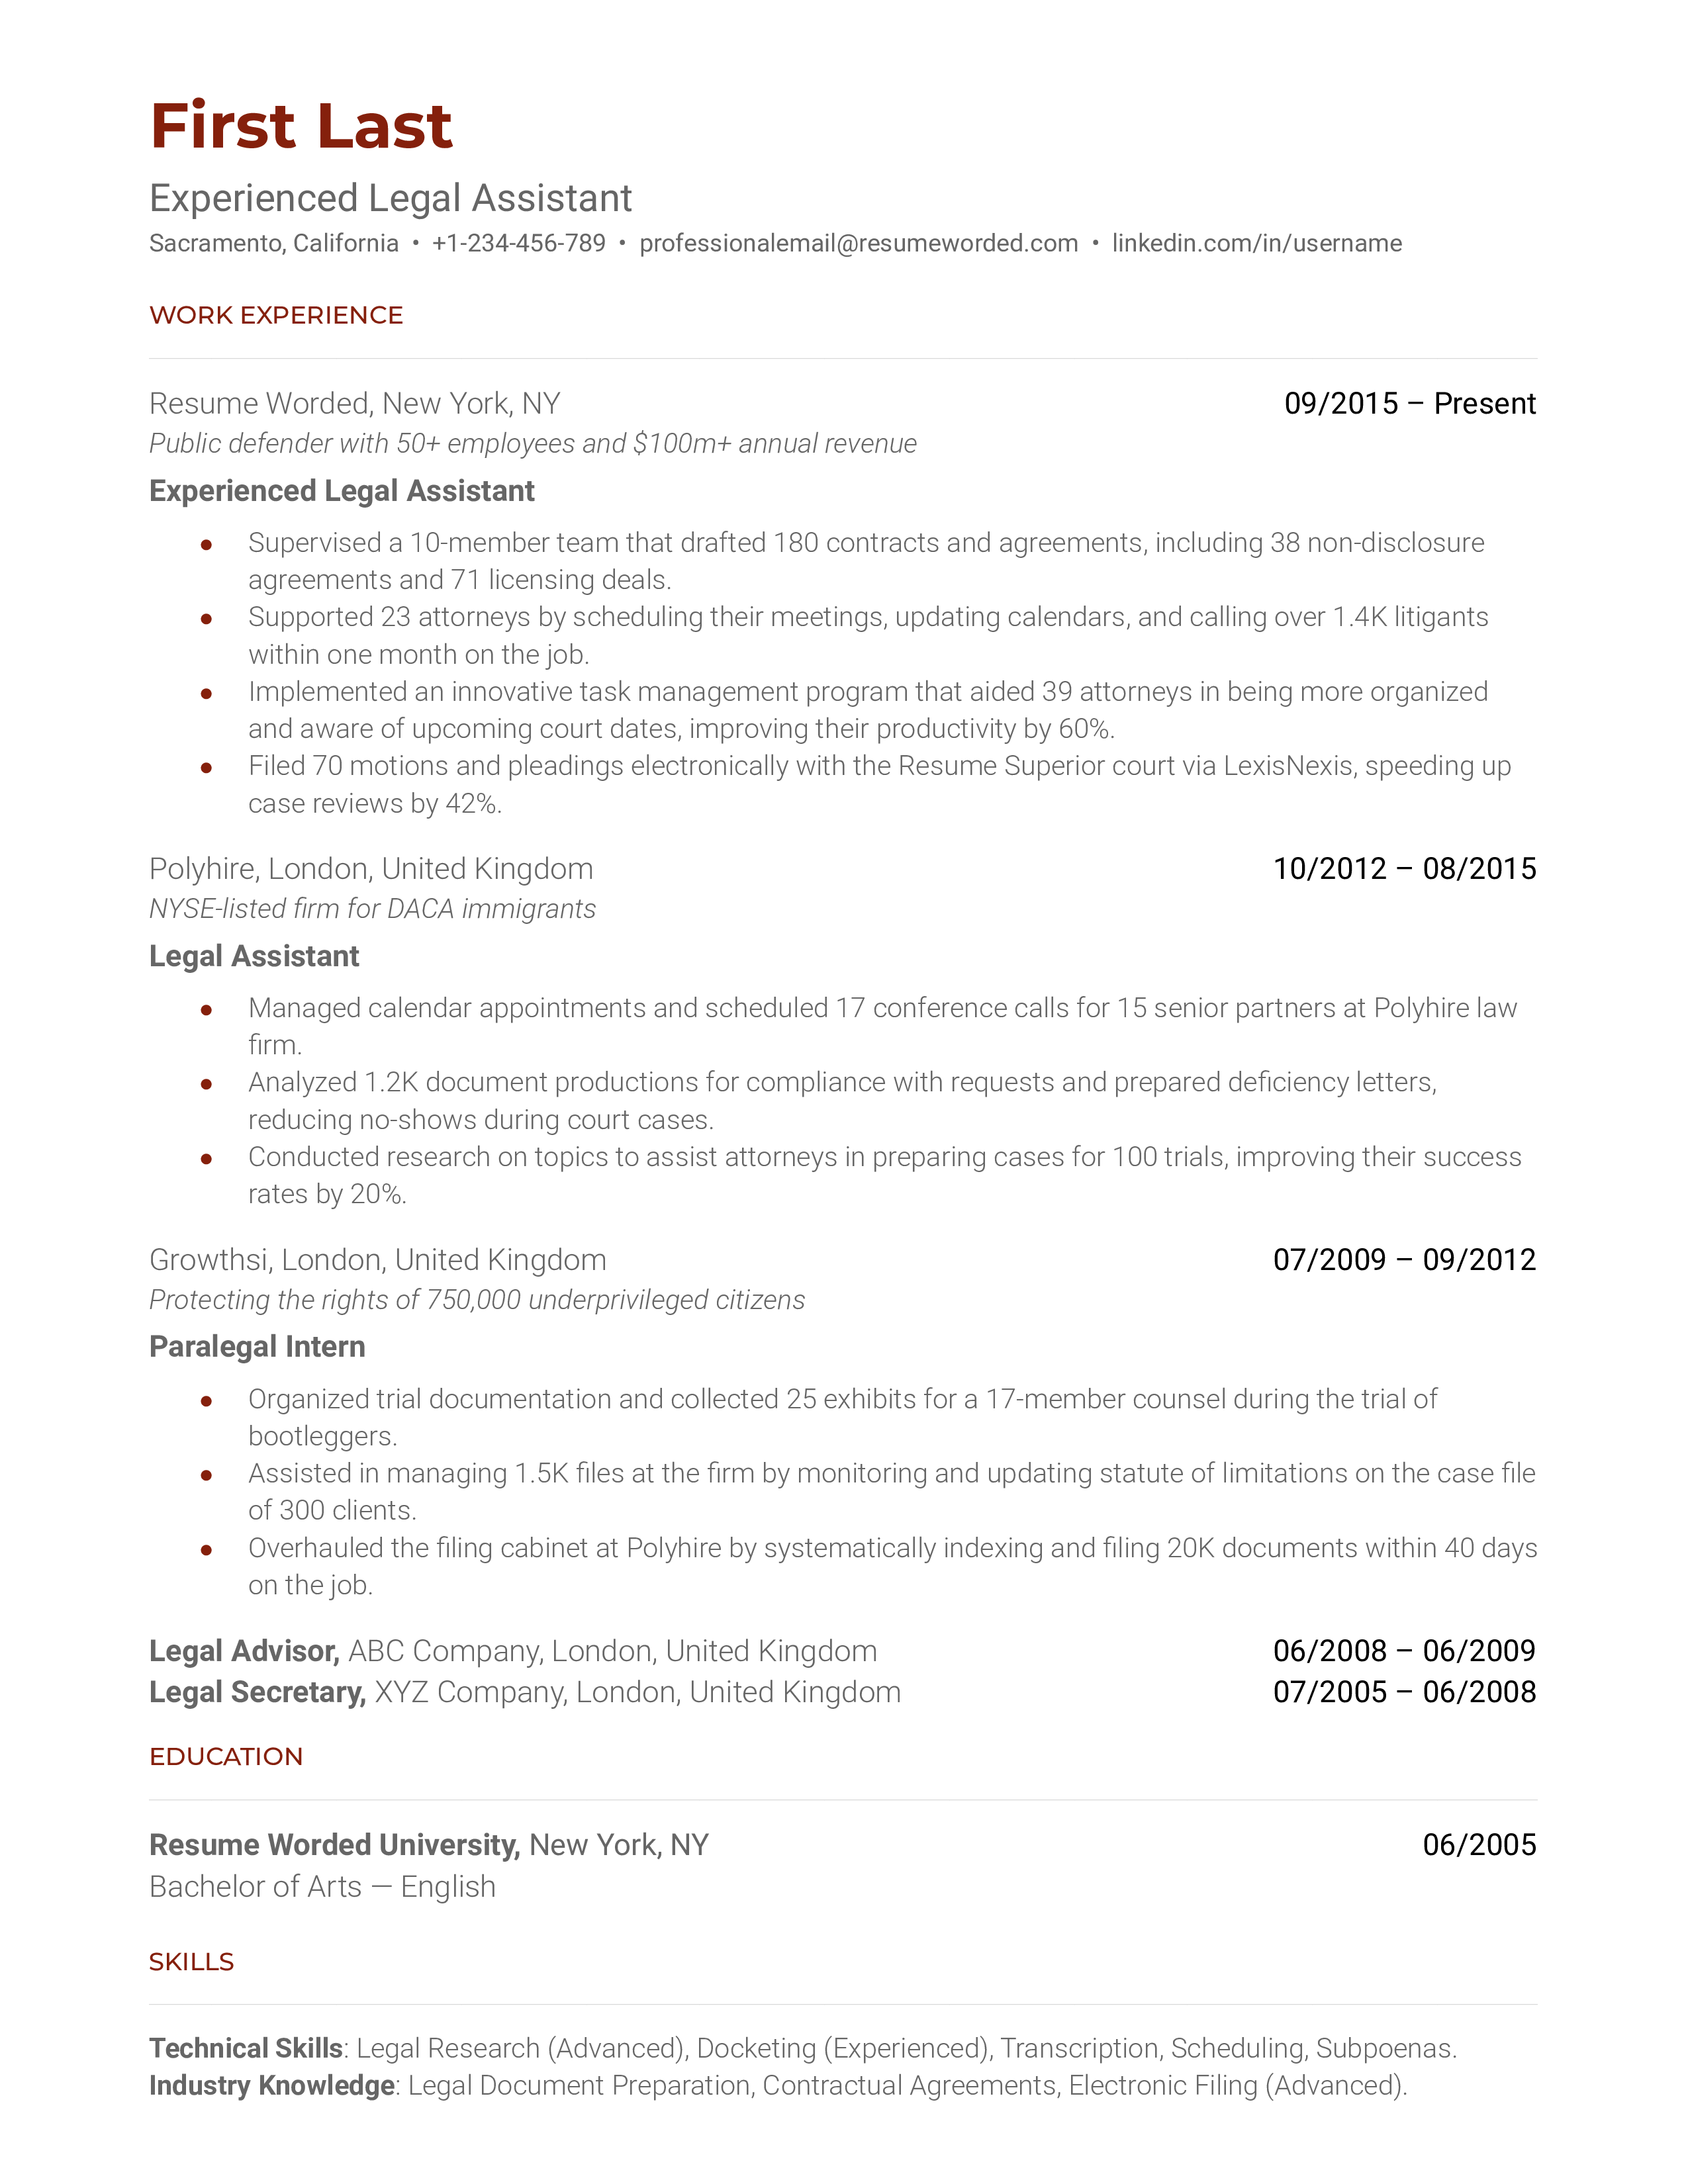 Experienced Legal Assistant Resume Sample